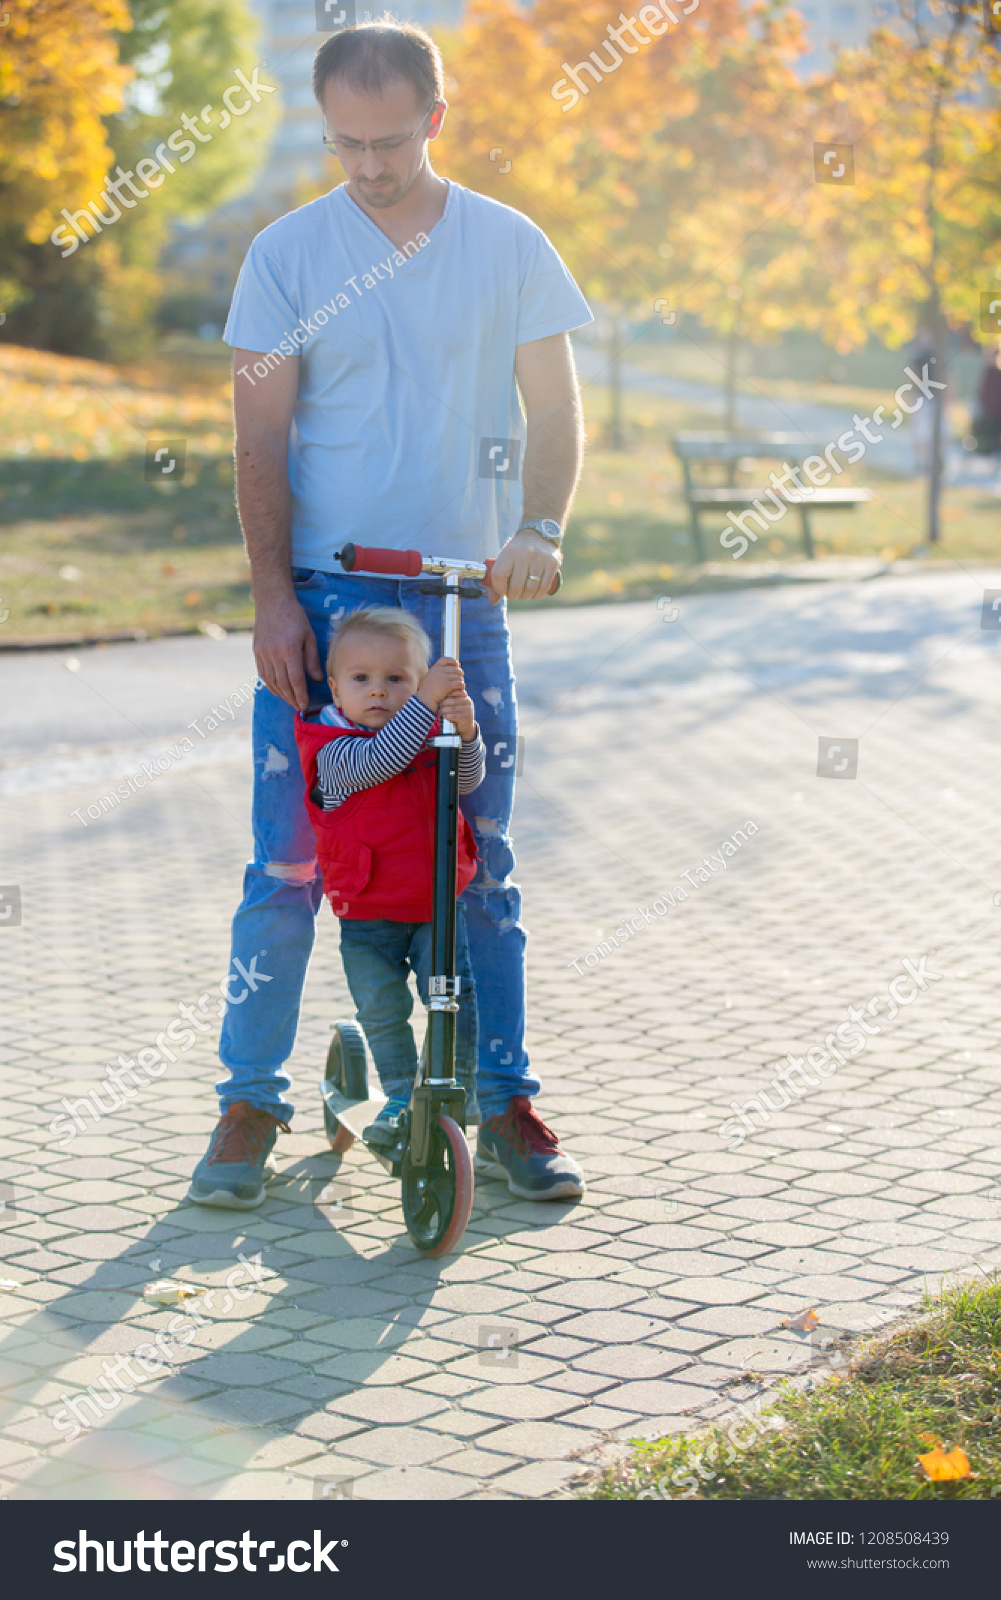 Father riding with his toddler son  scooter in a autumn park. . Active family leisure. Sports, leisure with kids concept. #1208508439